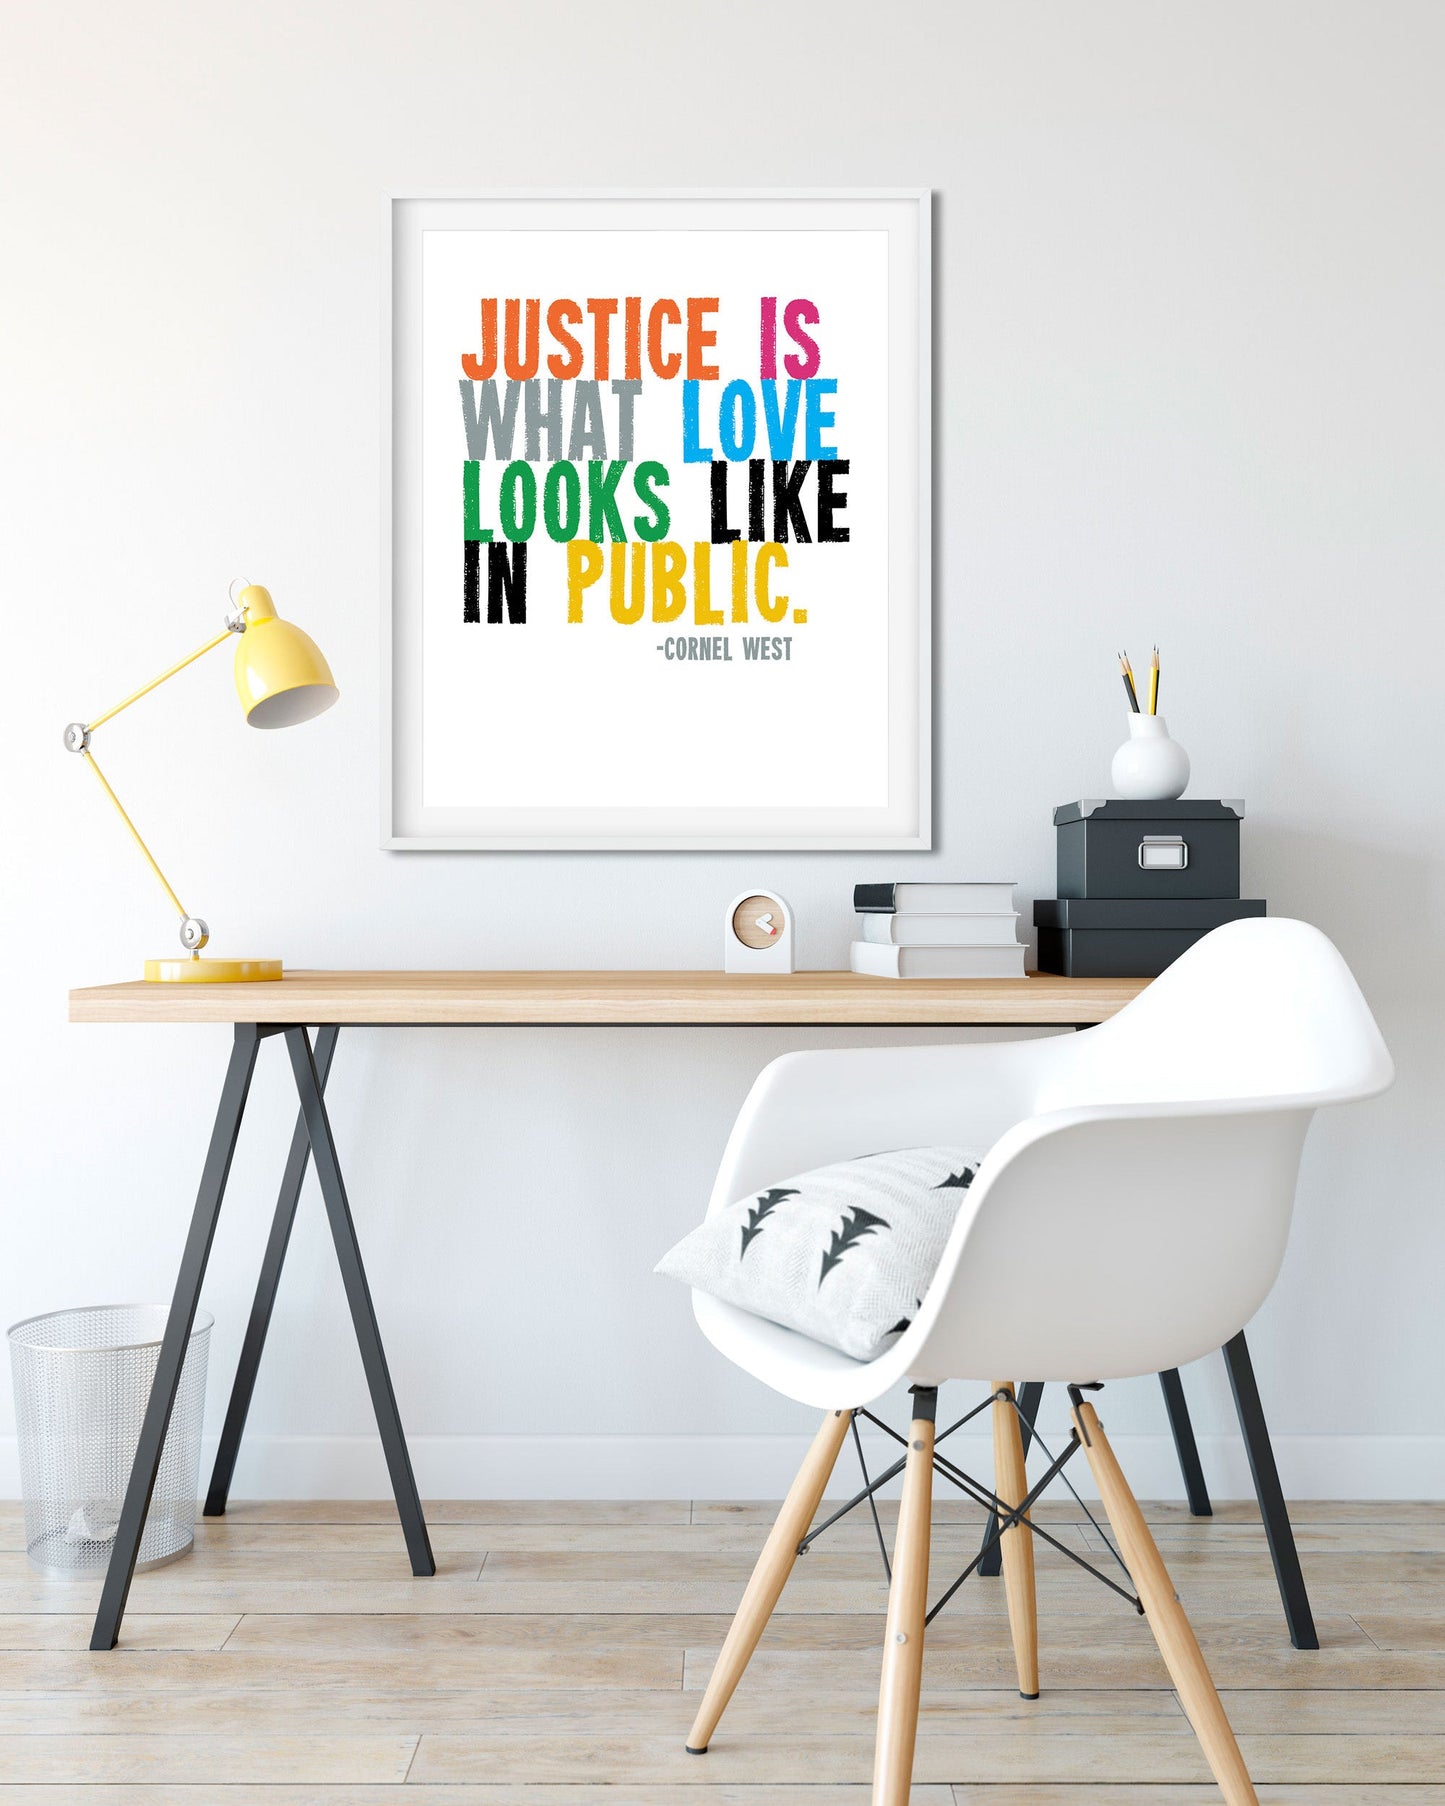 Cornel West Racial Justice Poster - Justice is What Love Looks Like in Public - Transit Design